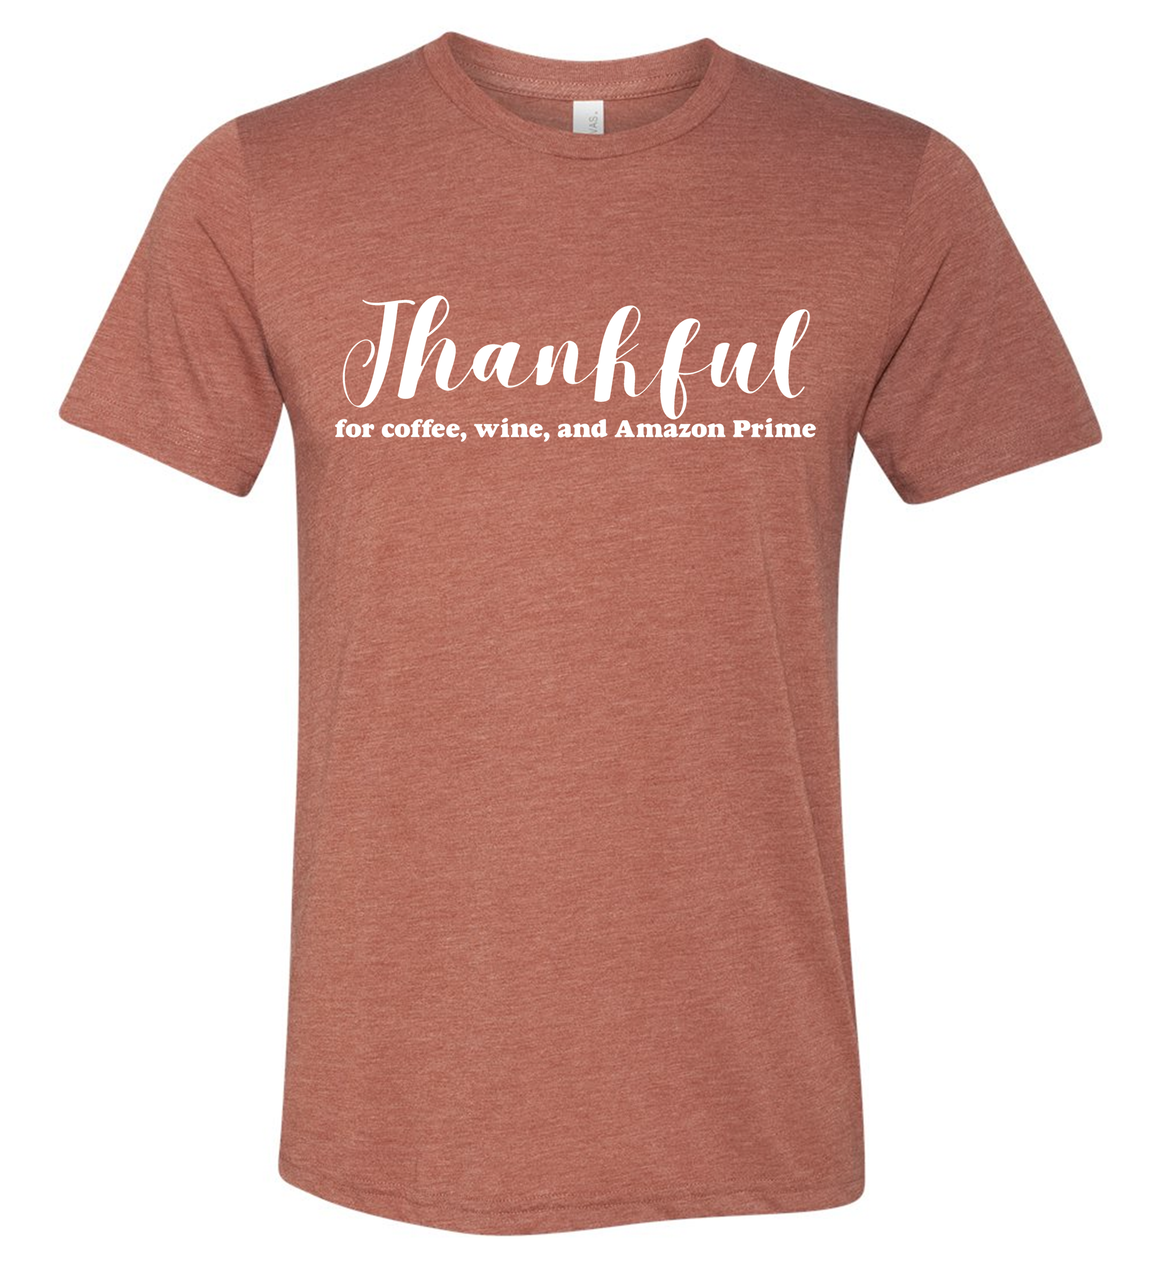 Thankful for Coffee, Wine, and Amazon Prime Unisex T-Shirt